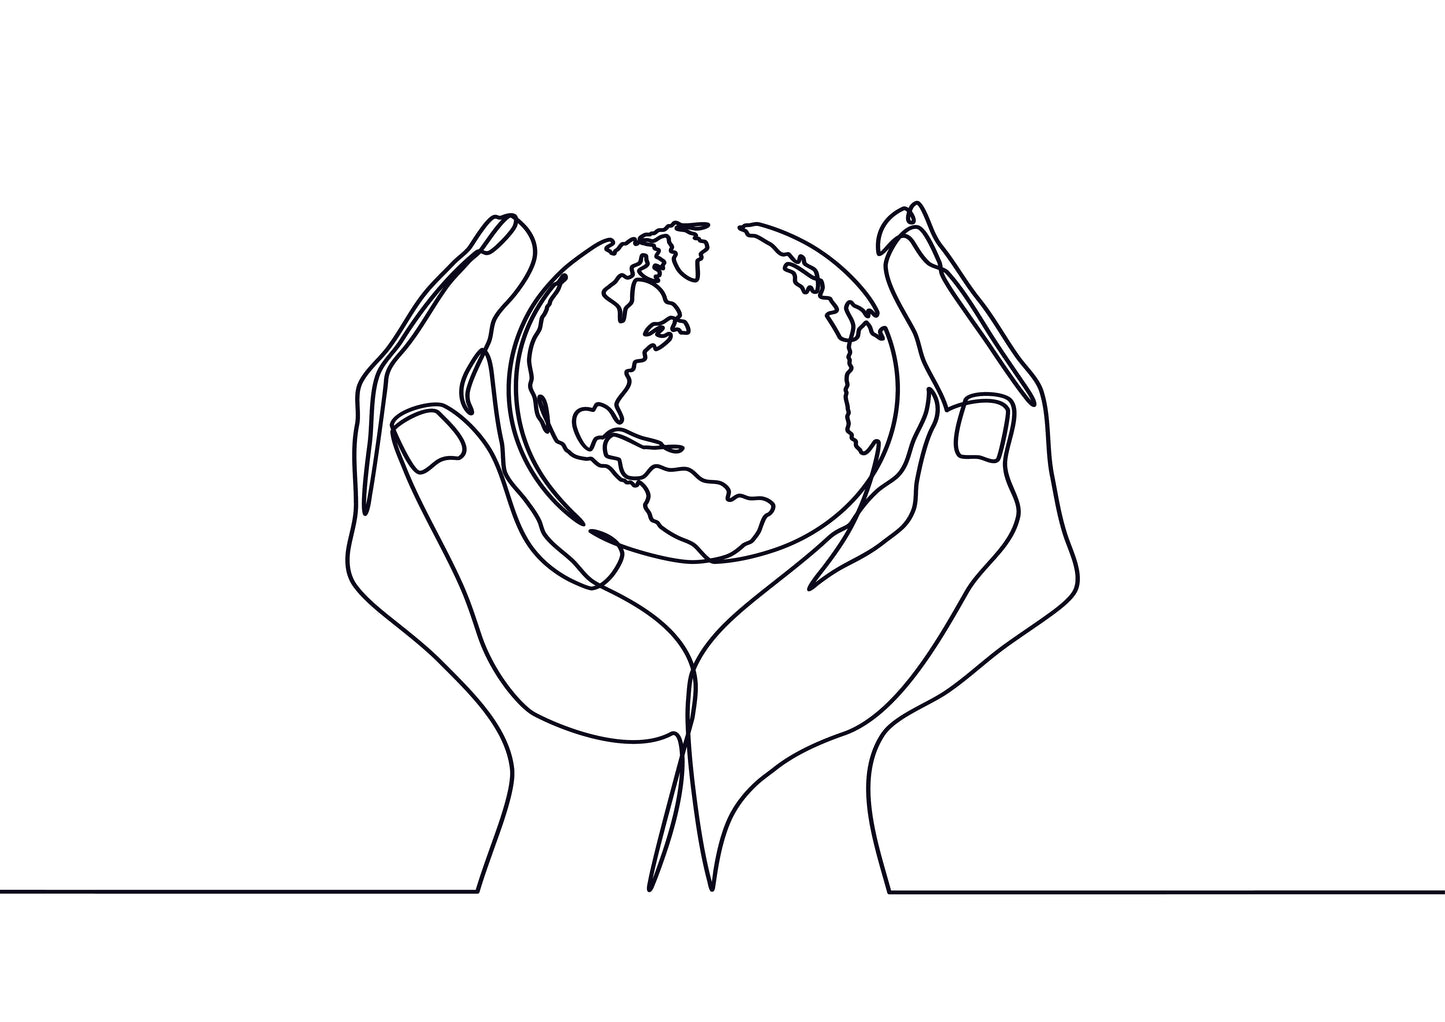 Line drawing of hands holding Earth globe